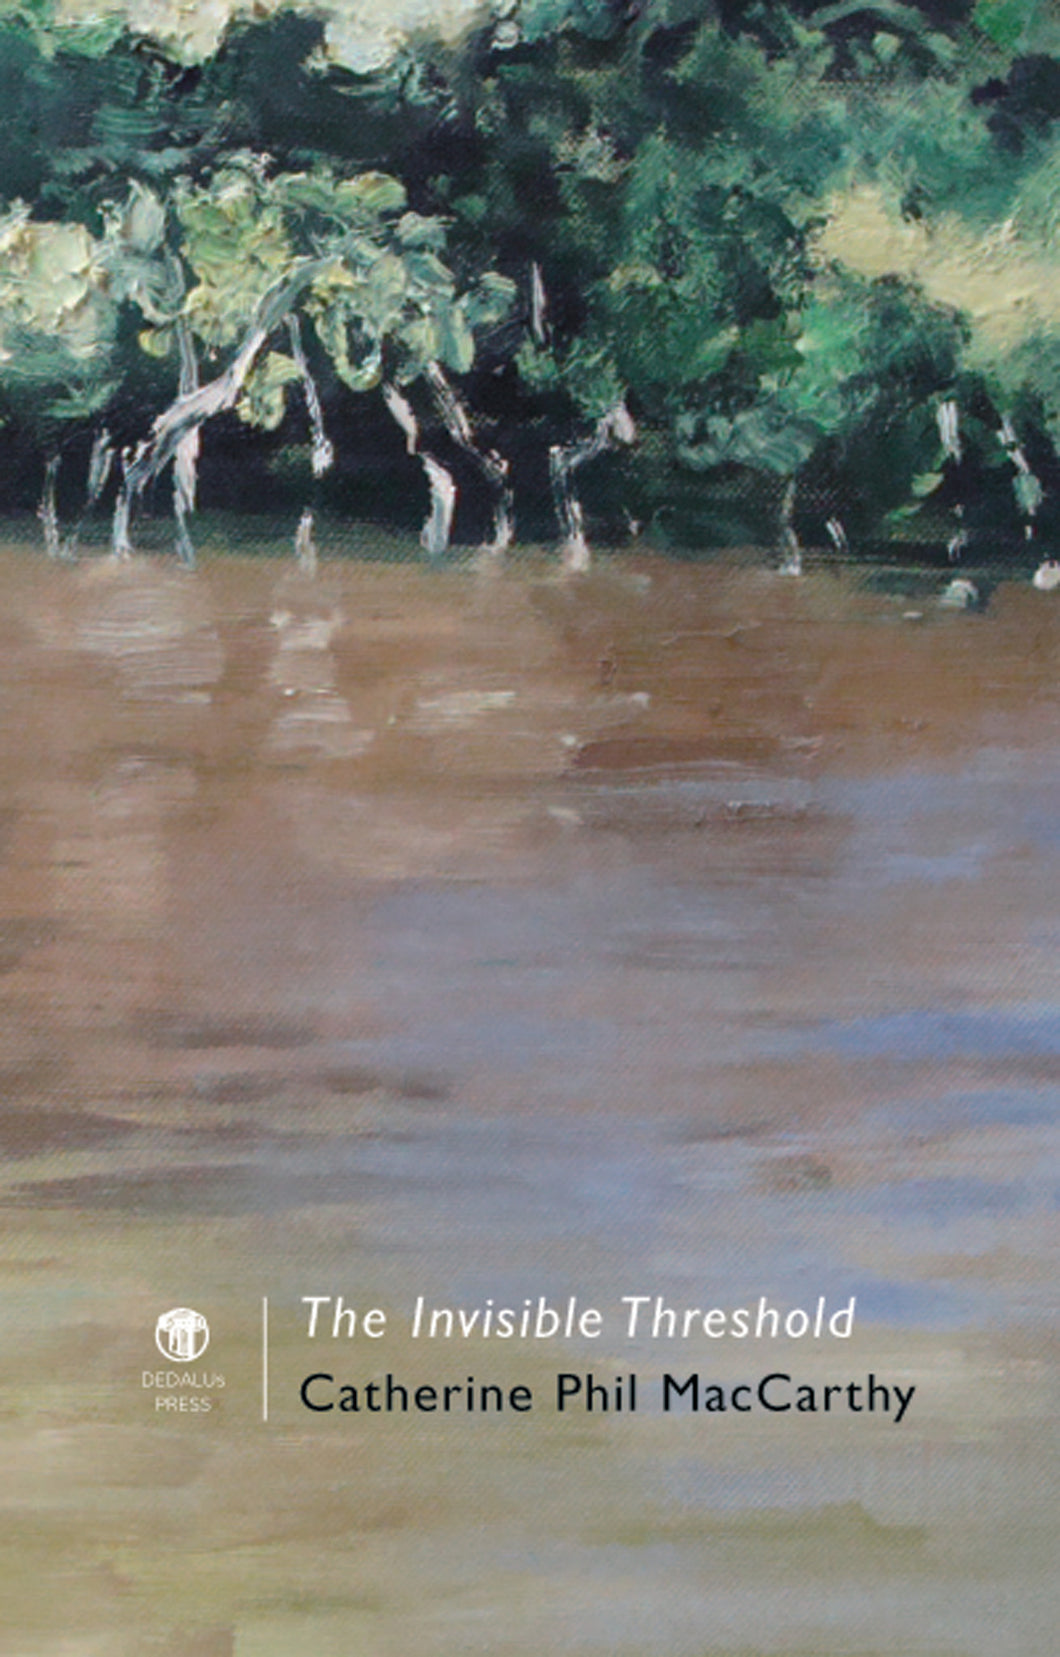 The Invisible Threshold